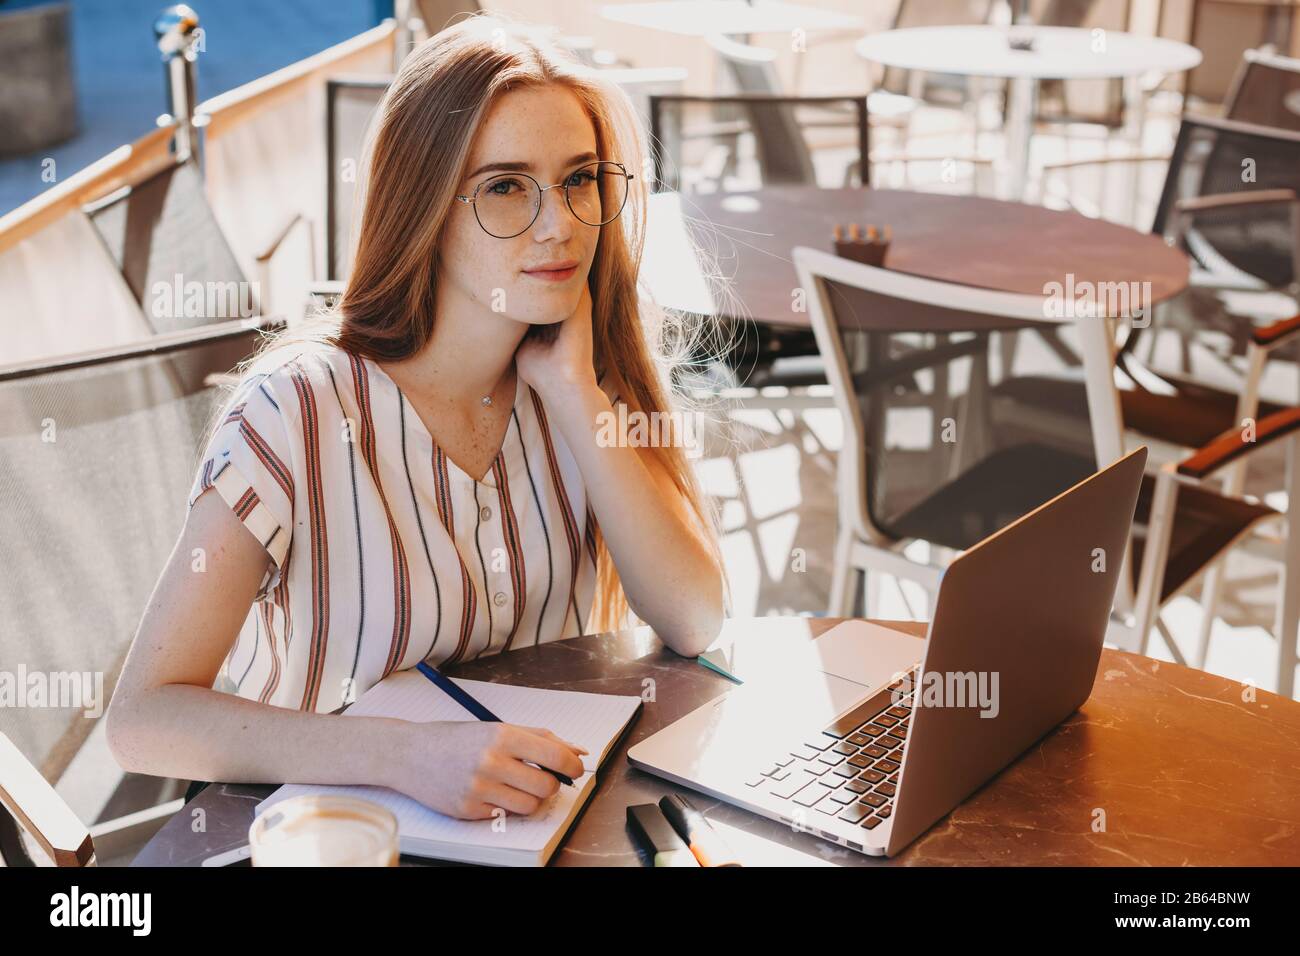 Caucasian woman with red hair and freckles having a coffee break in a coffee shop while using a laptop and making some notes Stock Photo